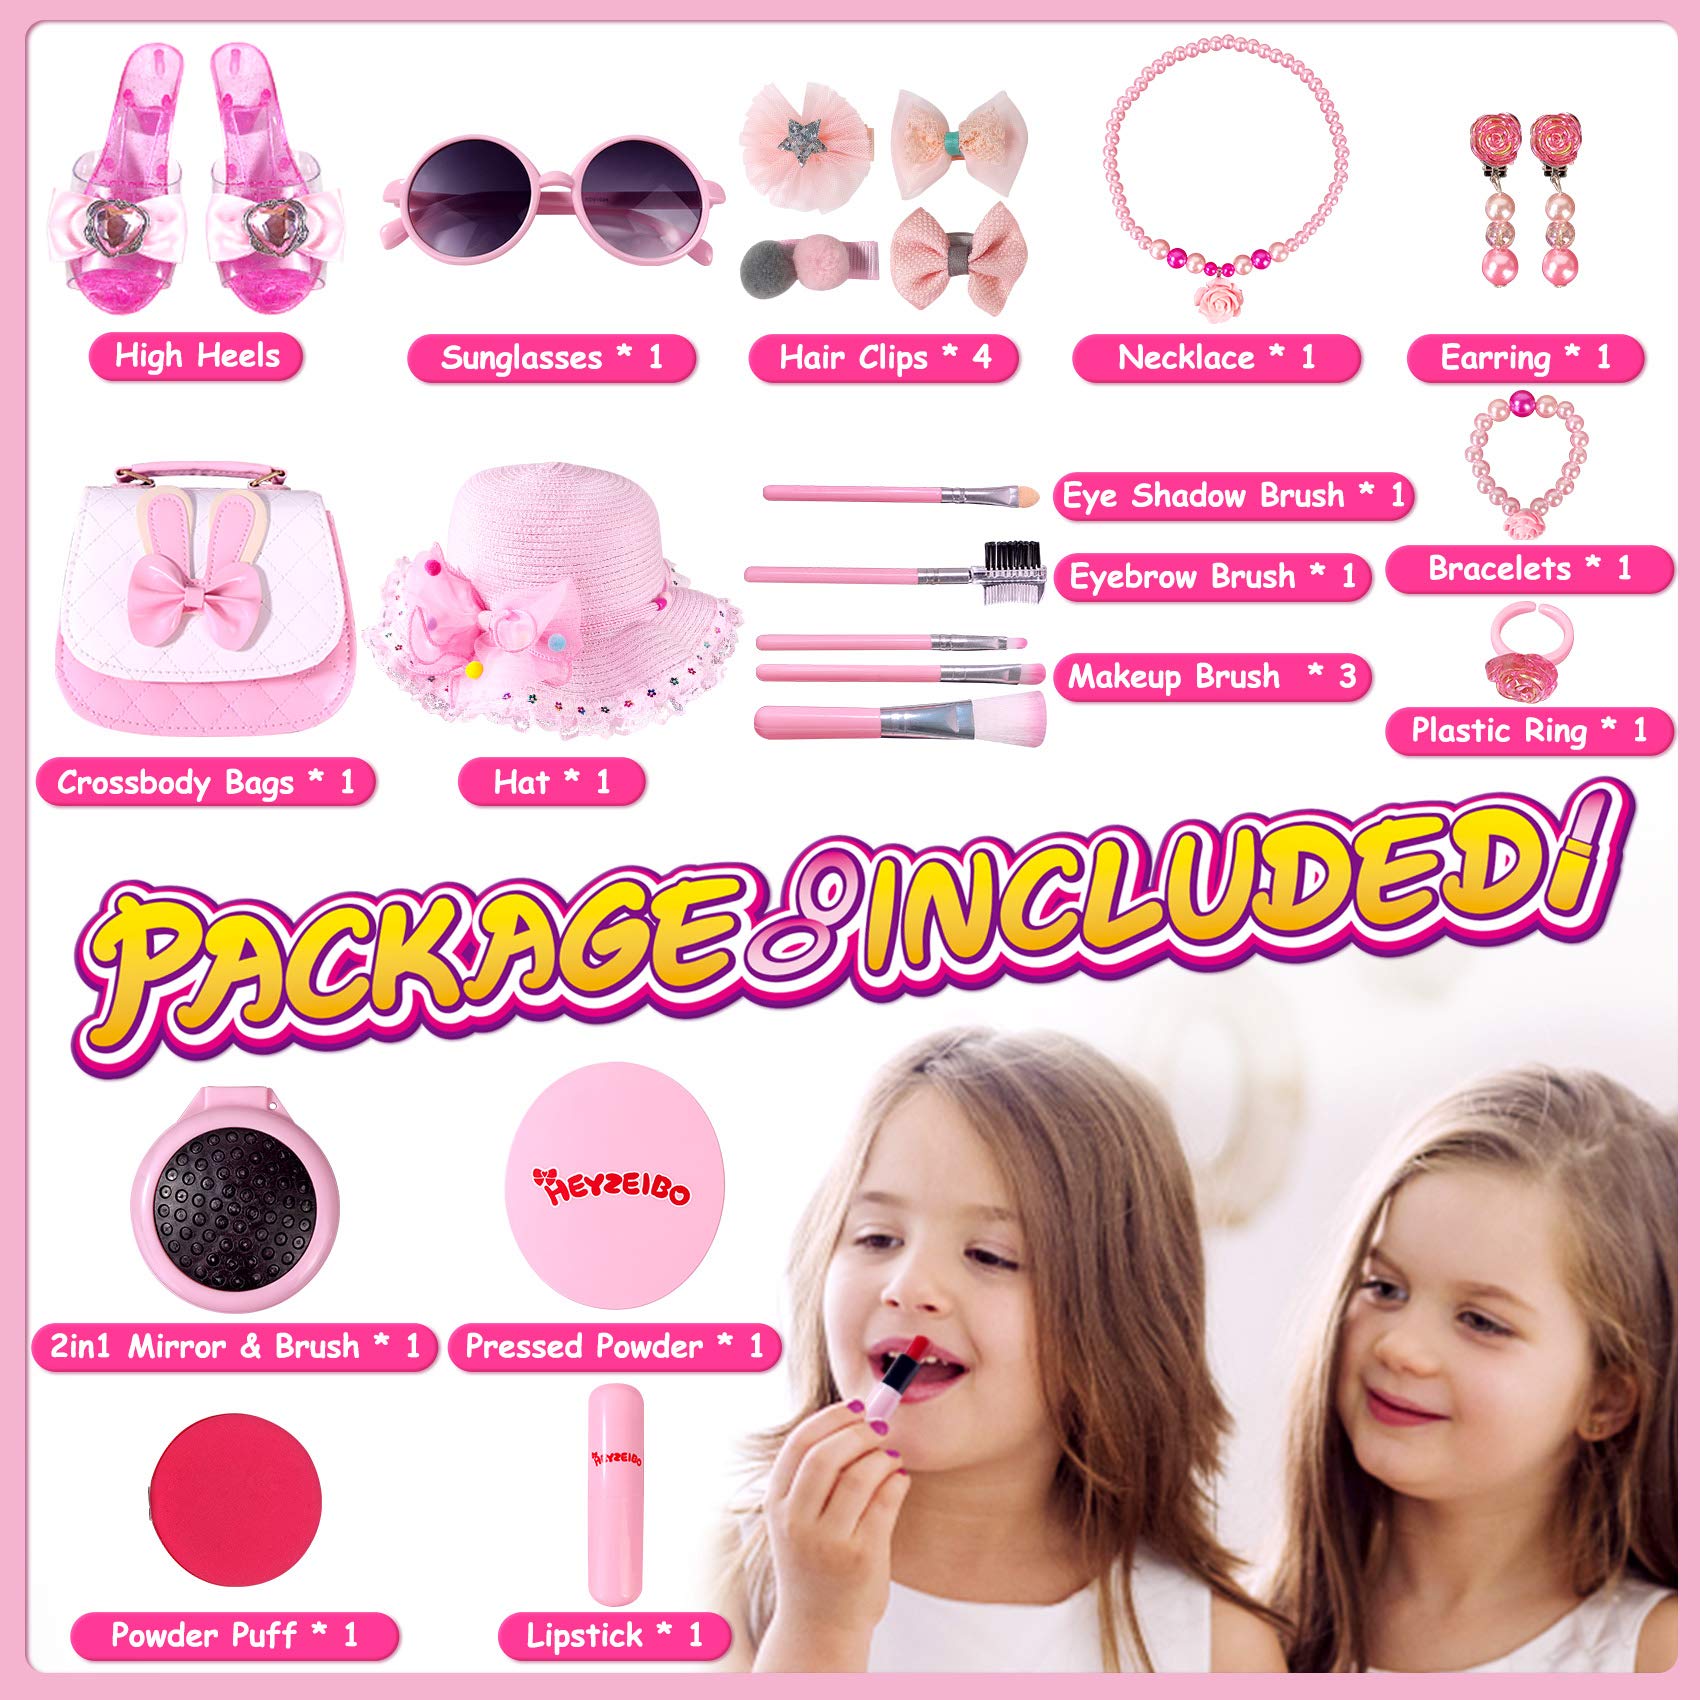 Princess Cosplay Toy for Girls, Dress Up & Pretend Play Costume, Makeup Starter Kit with Stylish Bag, Makeup, Shoes Jewelry for 3-12 Years Old Girls Birthday Halloween Christmas Costumes Fancy Party